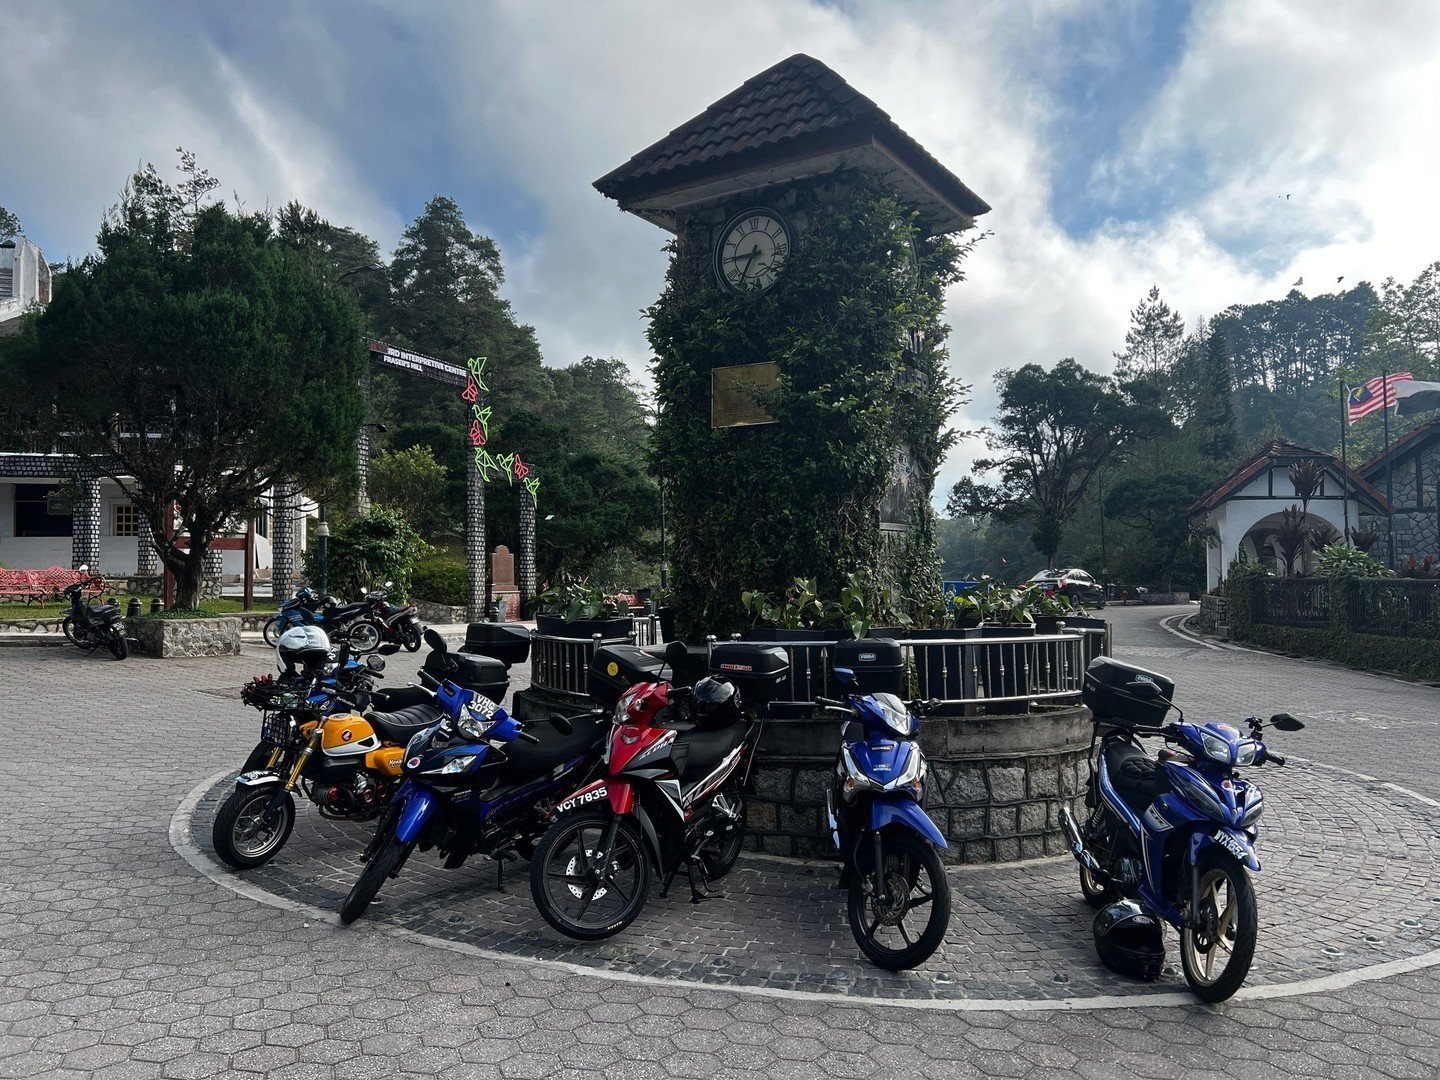 Frasers Hill Clock Tower. More like a clock podium to be honest but the whole area is very cool and worth a visit. ⁠
⁠
- Small Bike Stuff